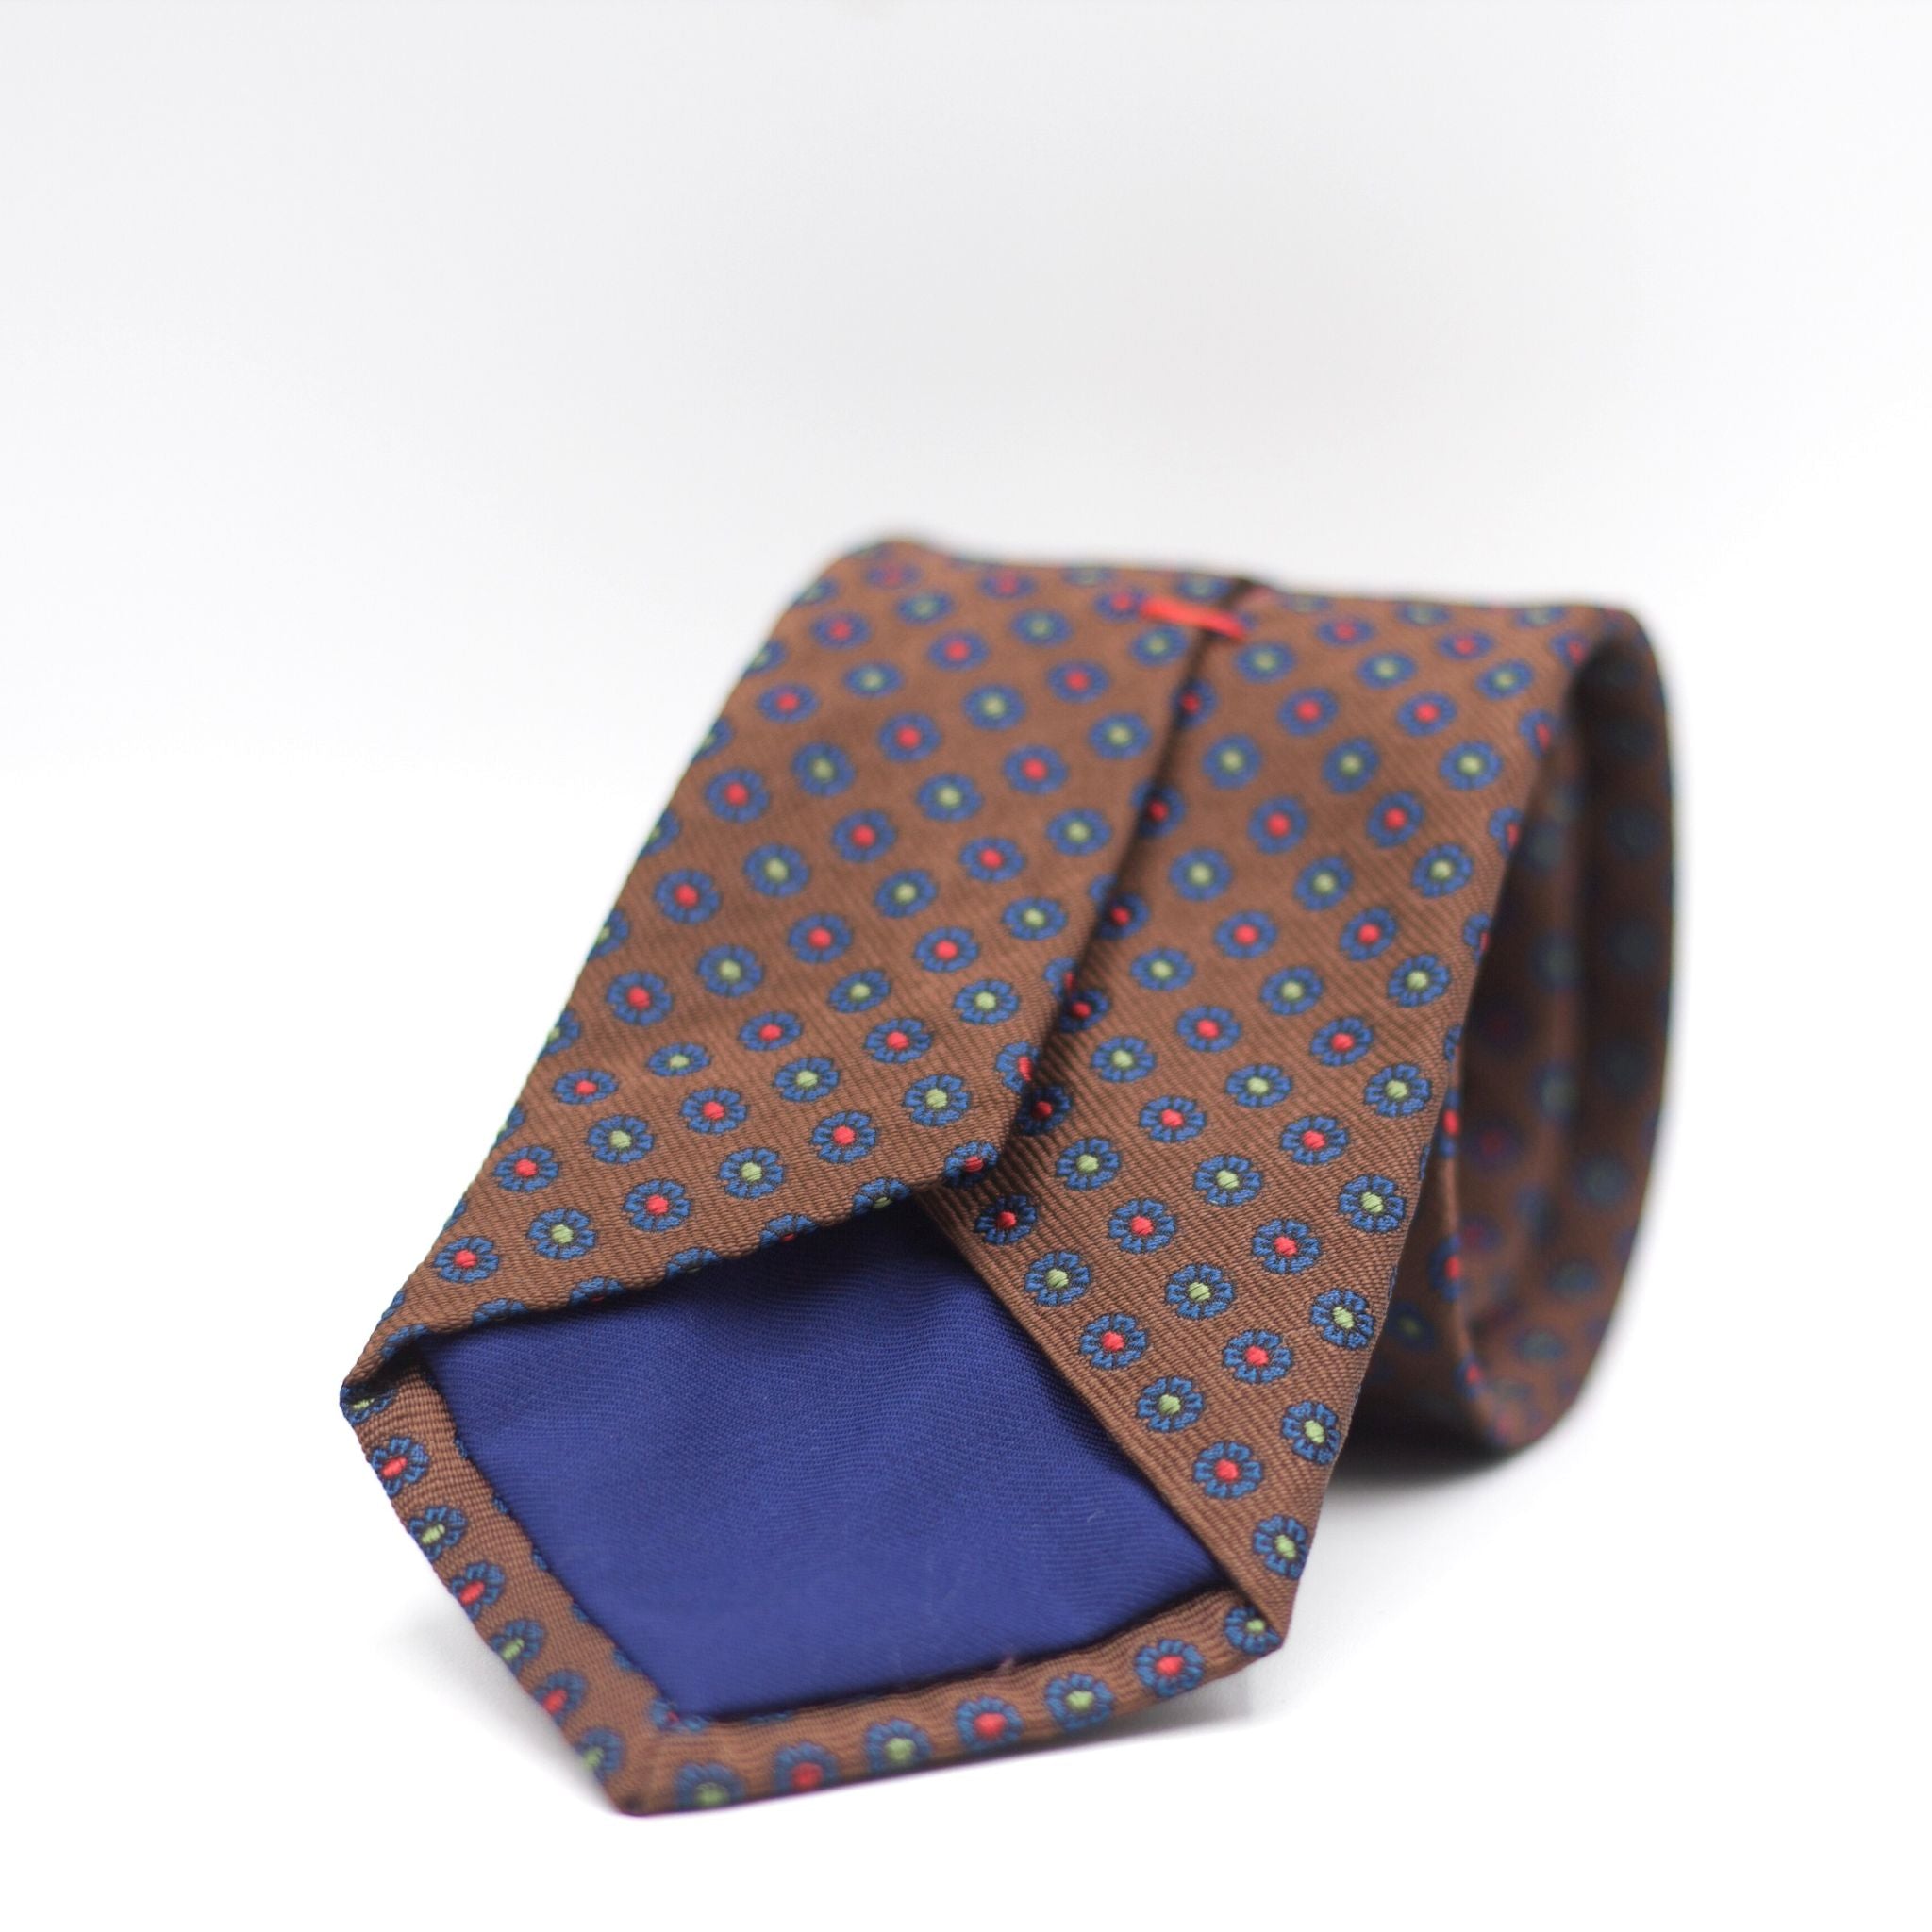 Cruciani & Bella 100% Silk Made in England Jacquard  Tipped Brown, Green, Red and Blue Motif Tie Handmade in Italy 8 cm x 150 cm